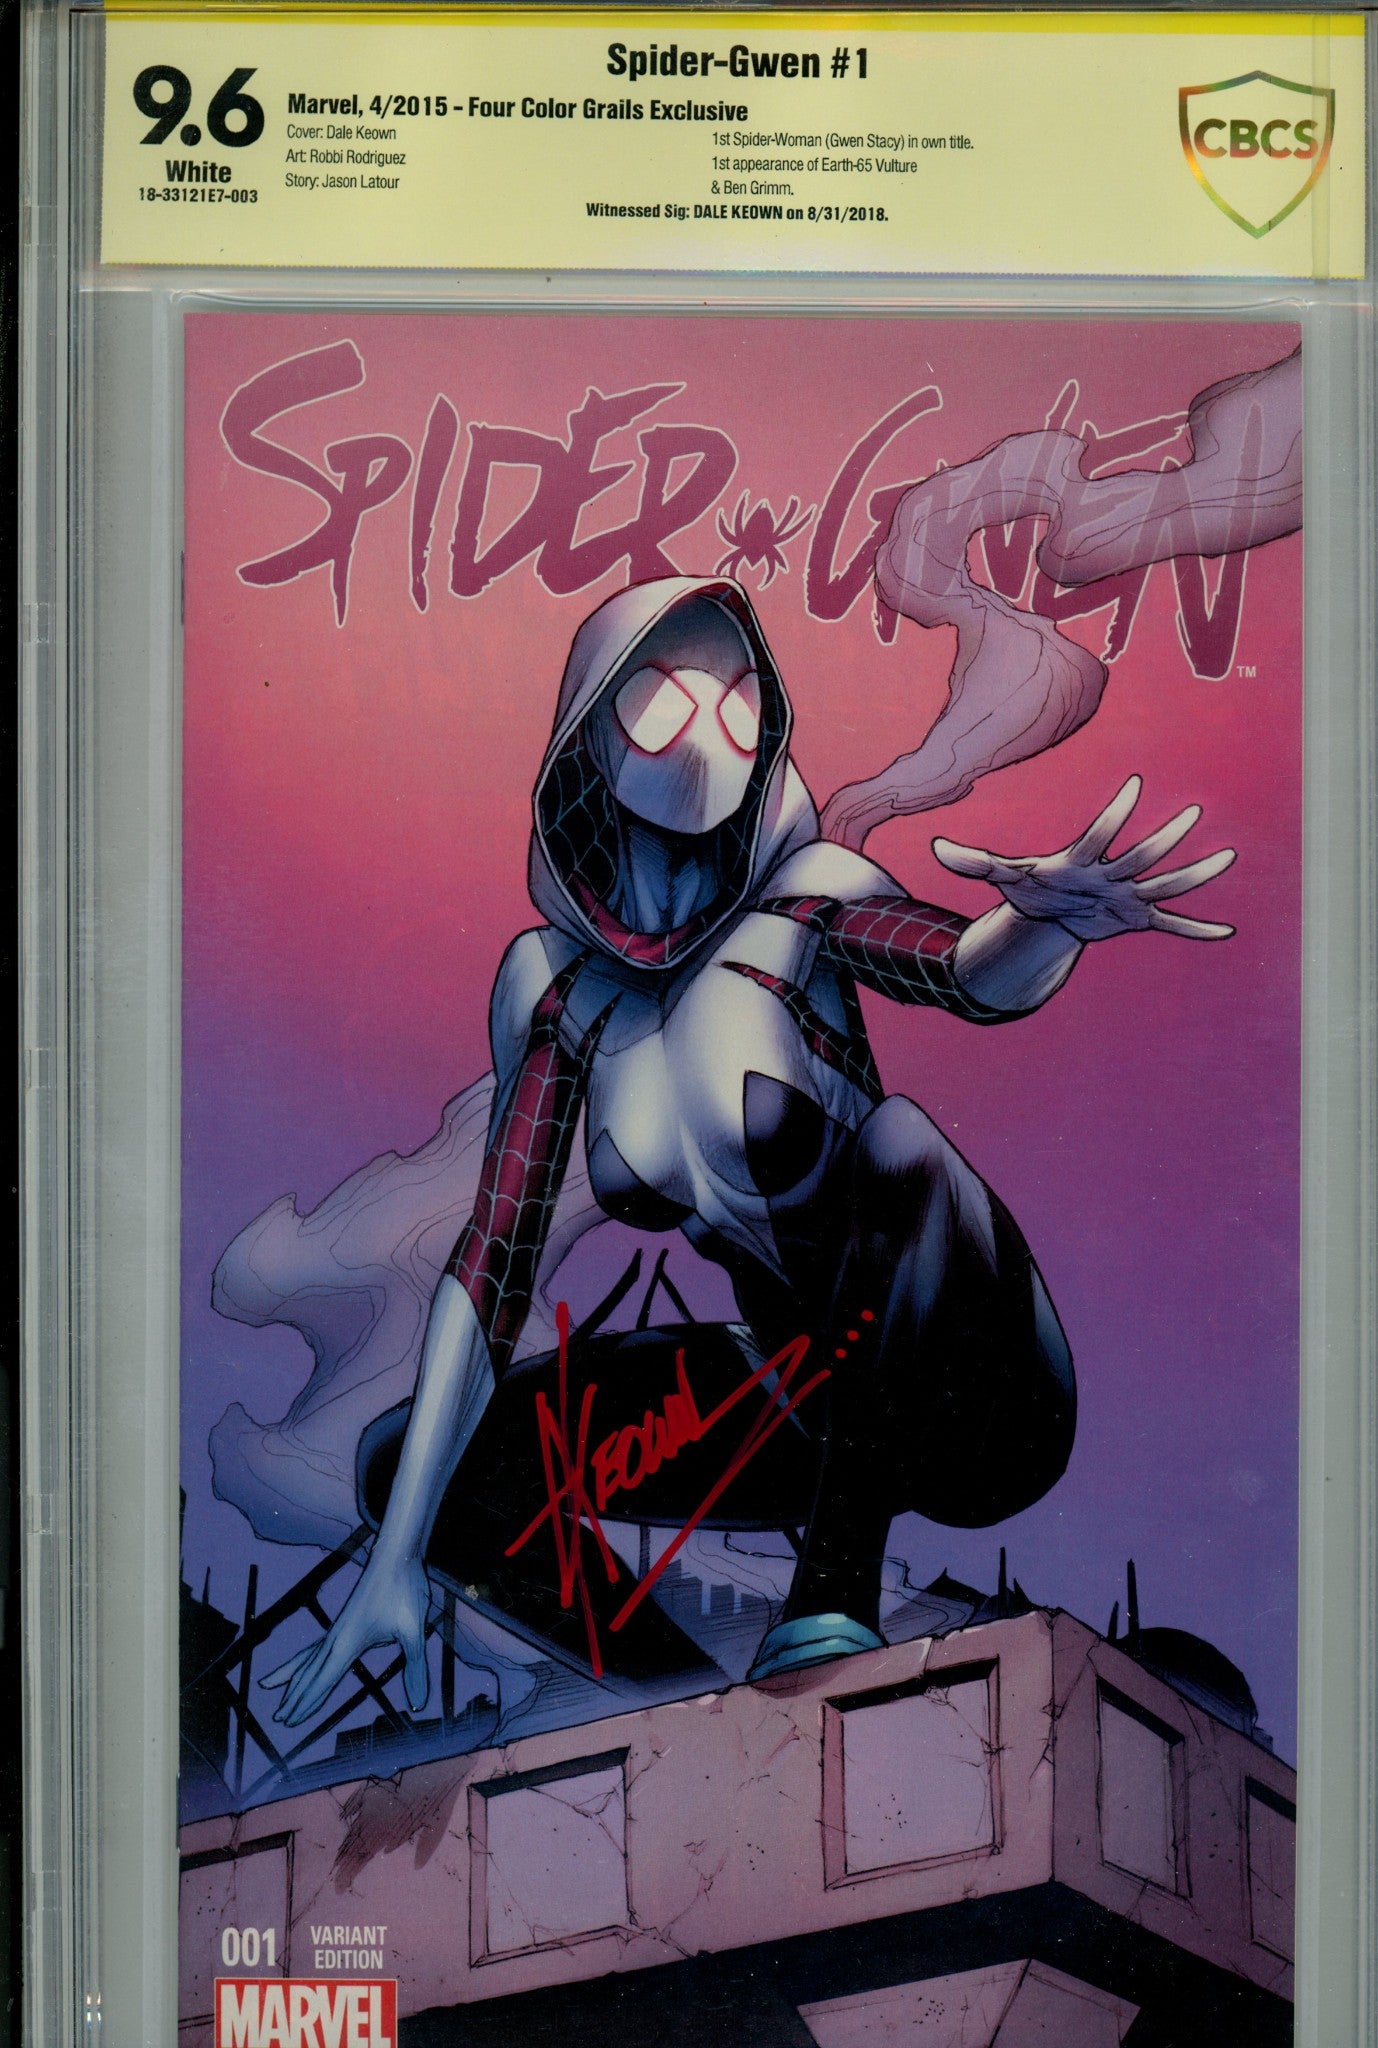 Spider-Gwen Vol 1 1 Keown Exclusive Variant CBCS 9.6 Signed Dale Keown (2015)